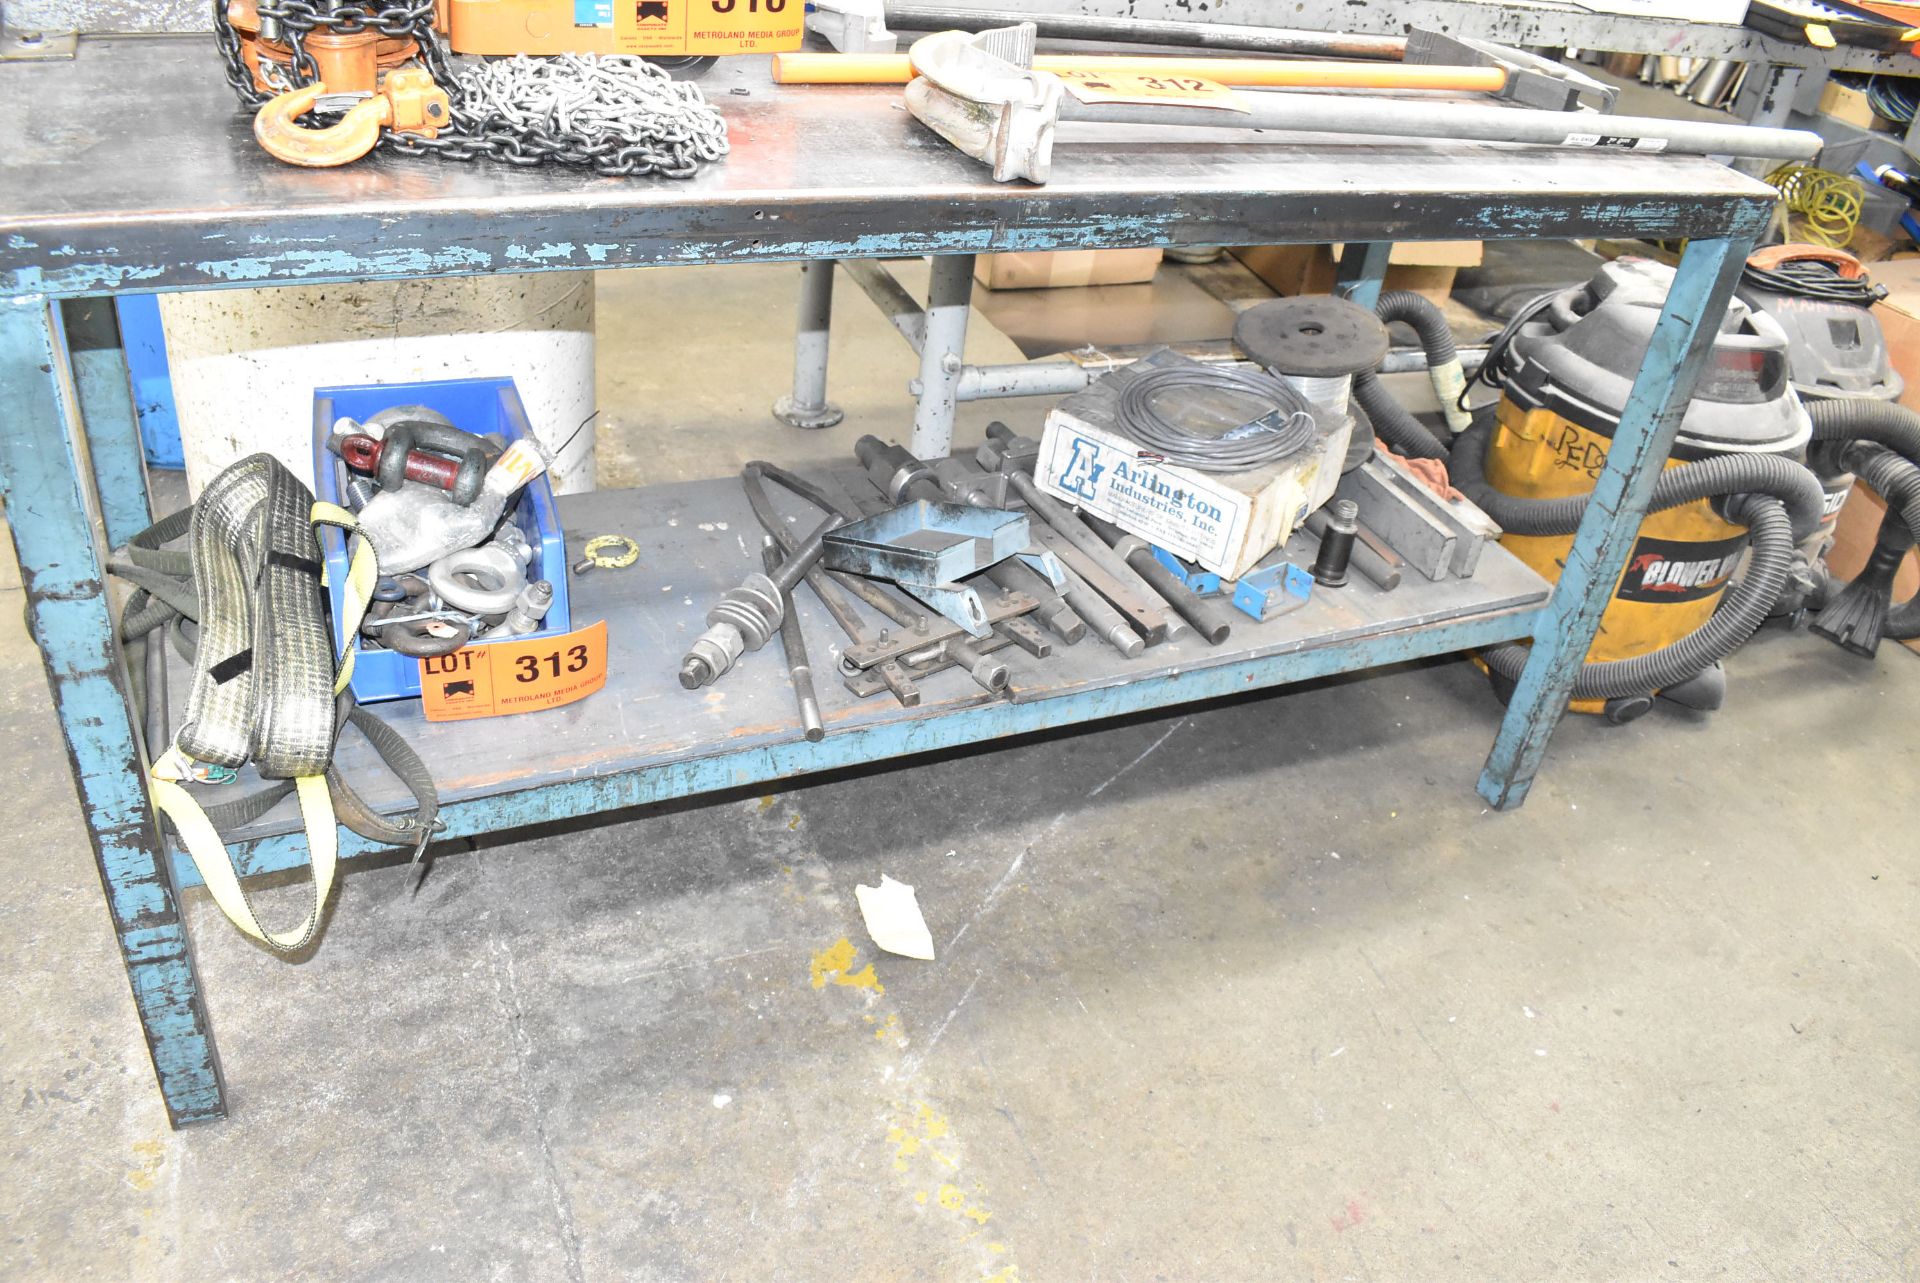 LOT/ REMAINING CONTENTS OF WORK BENCH - INCLUDING LIFTING SUPPLIES, CABLE, SURPLUS MATERIAL